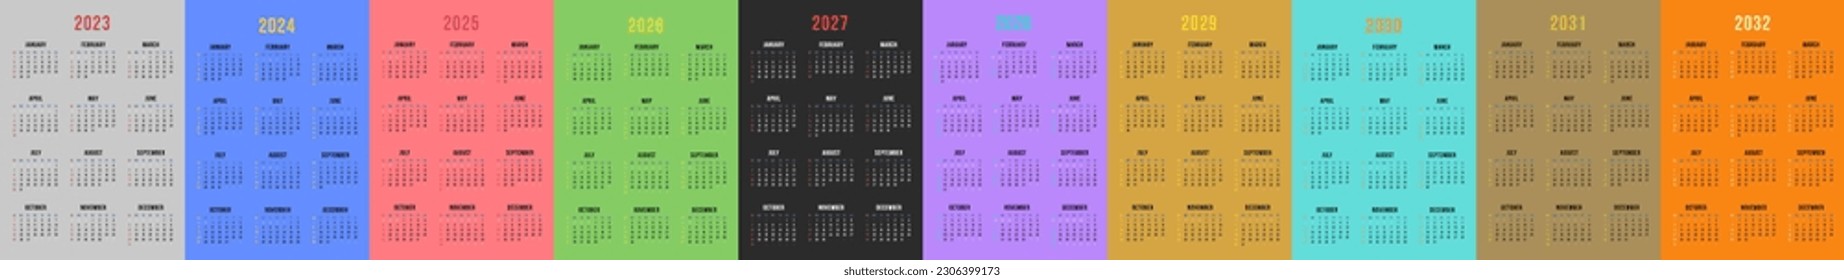 Colorful calendar set for 2023, 2024, 2025,2026, 2027, 2028, 2029, 2030, 2031, 2032 years. One Page Editable Vertical Vector Calendar. svg